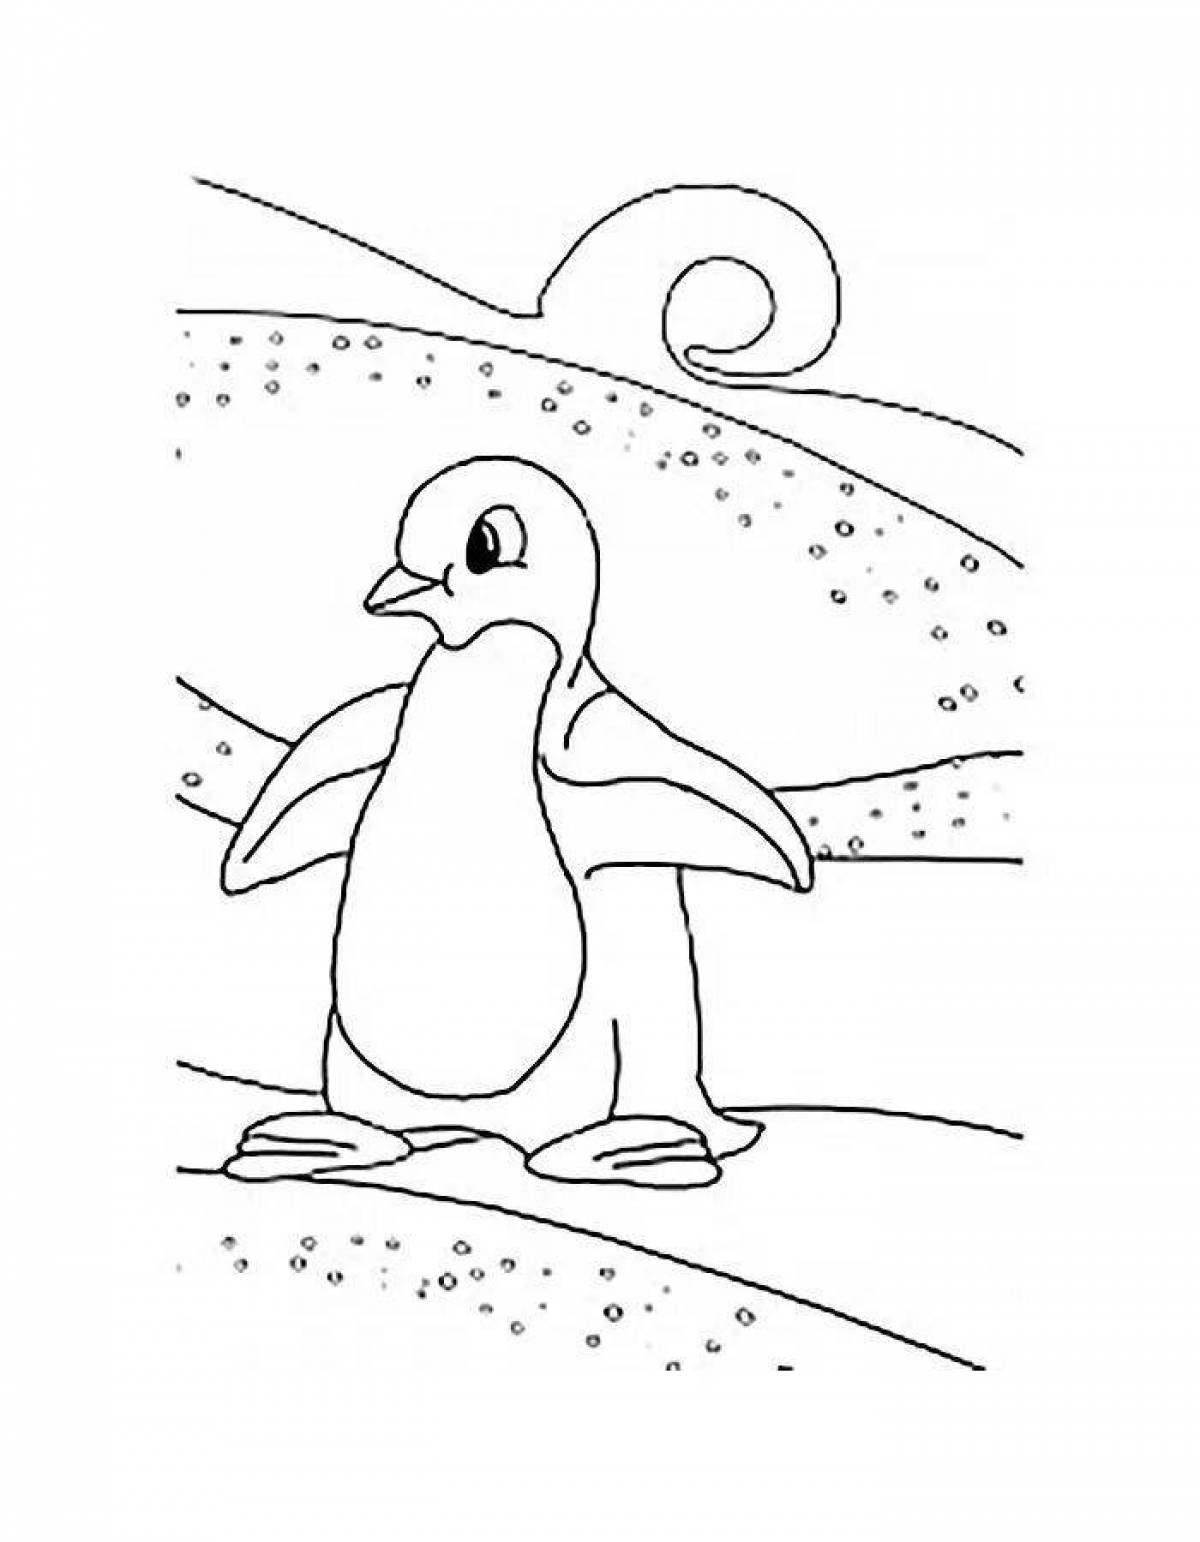 Coloring page wild penguin on ice